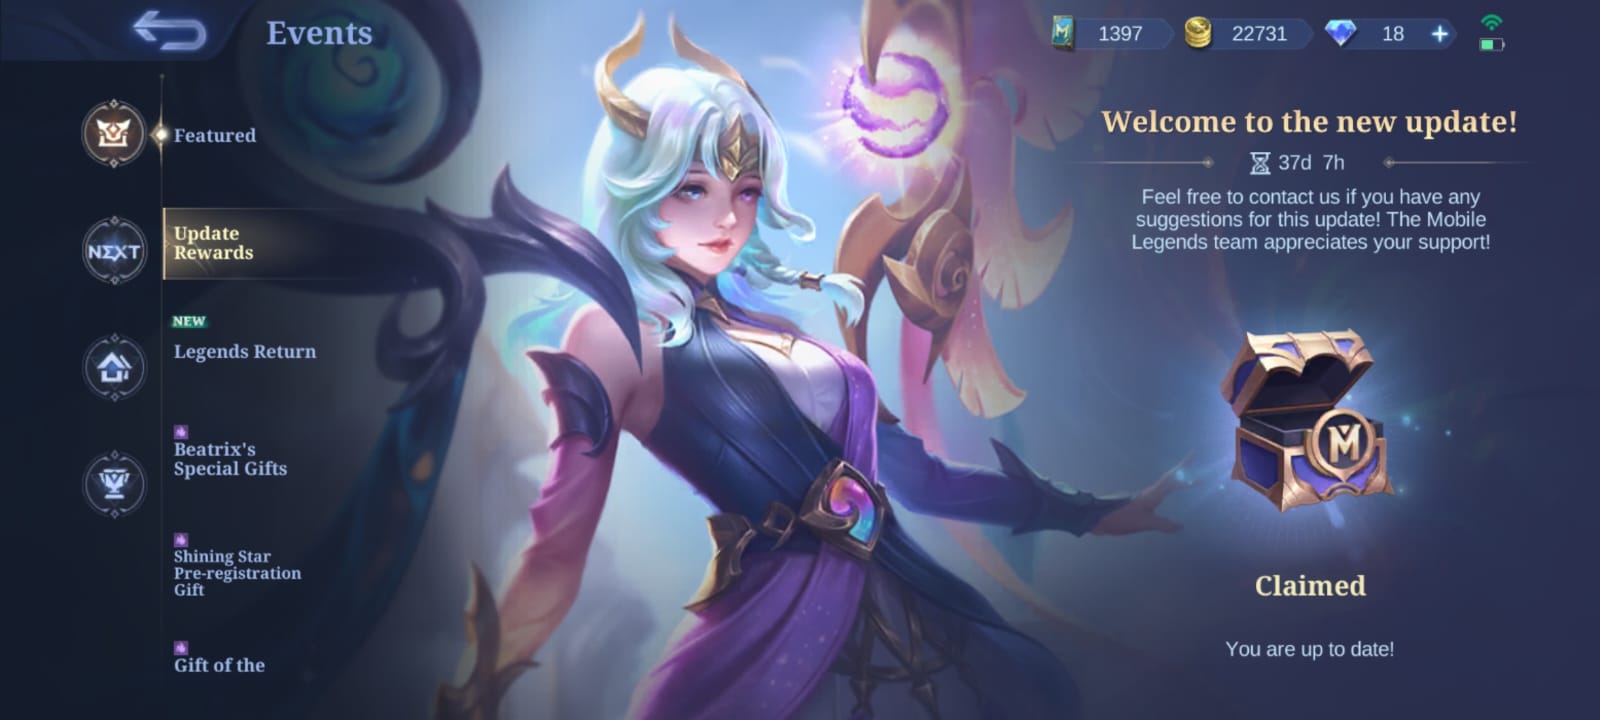 Mobile Legends cannot Update Claim Update Prize 2023